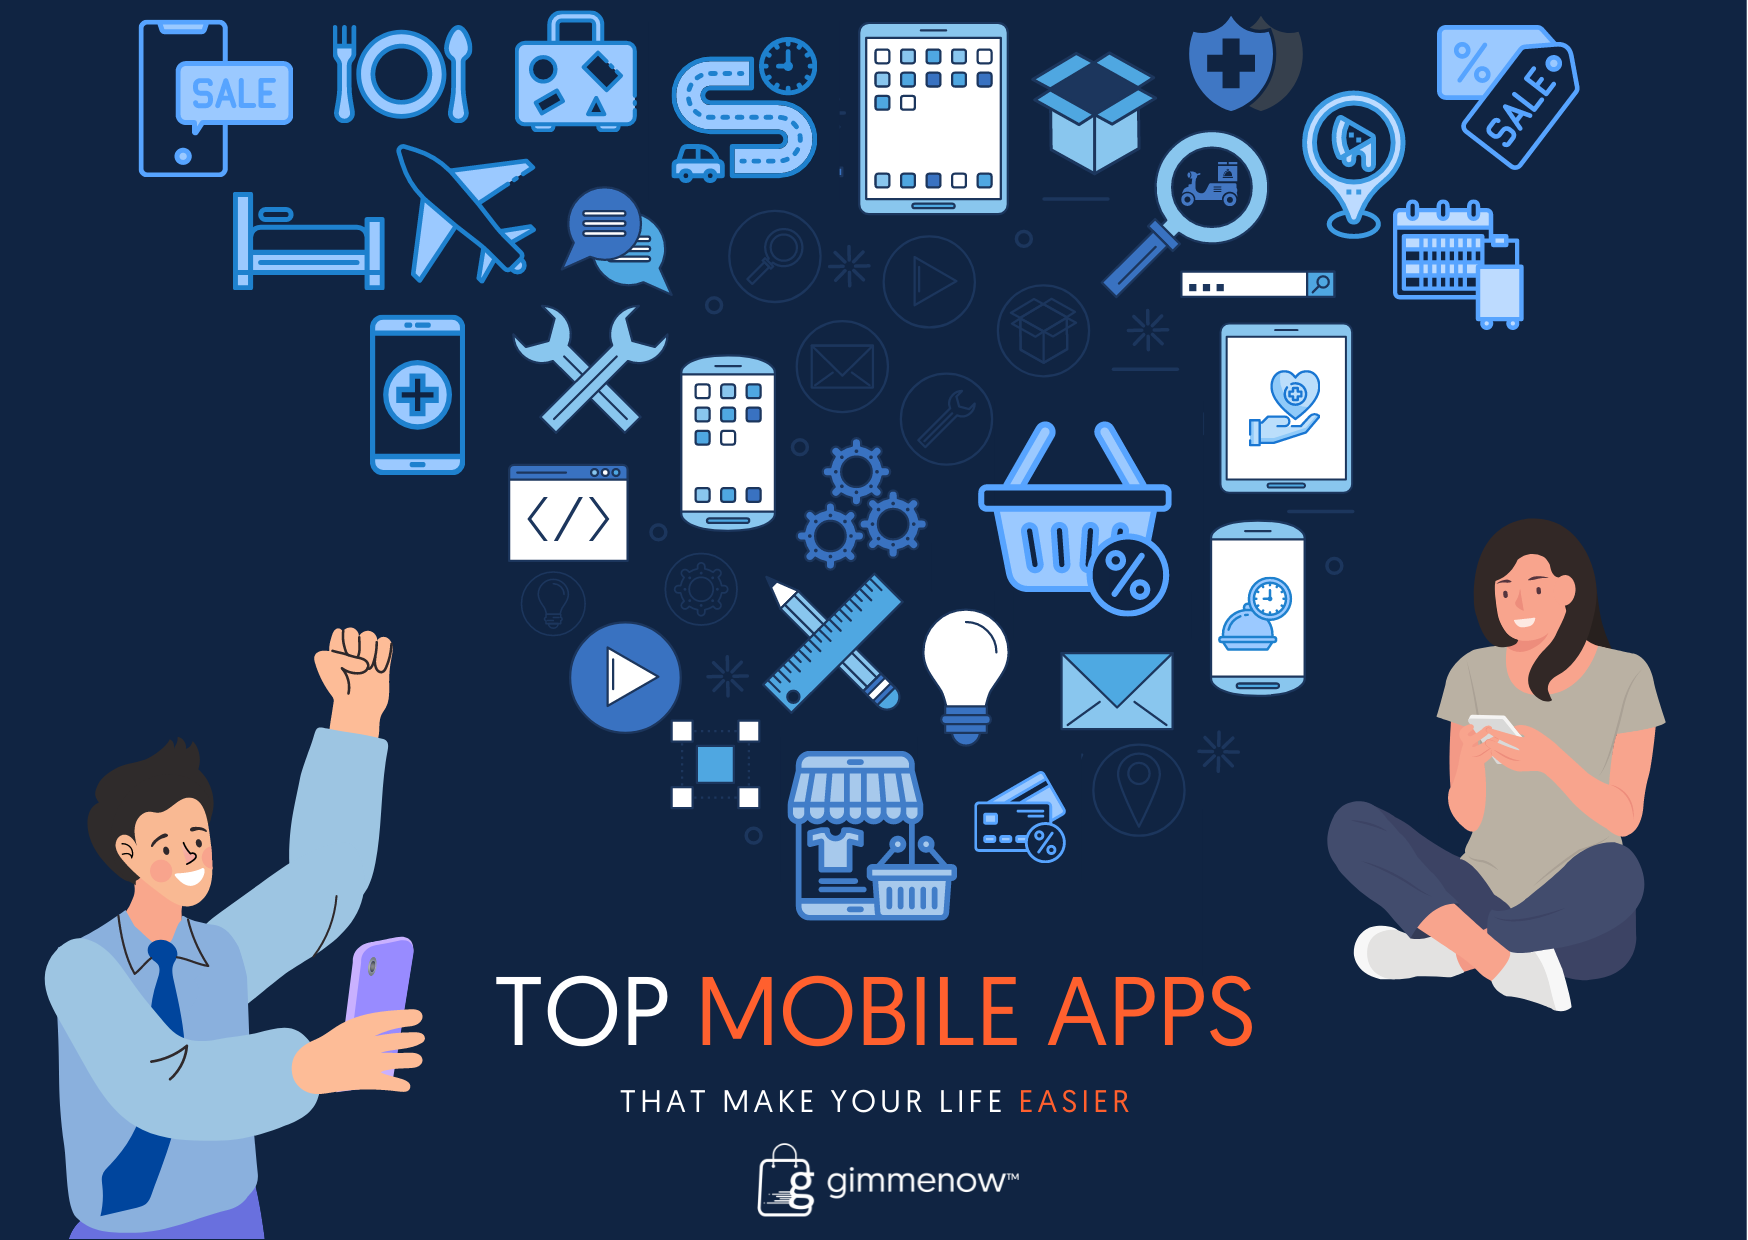 GimmeNow Top Mobile Apps